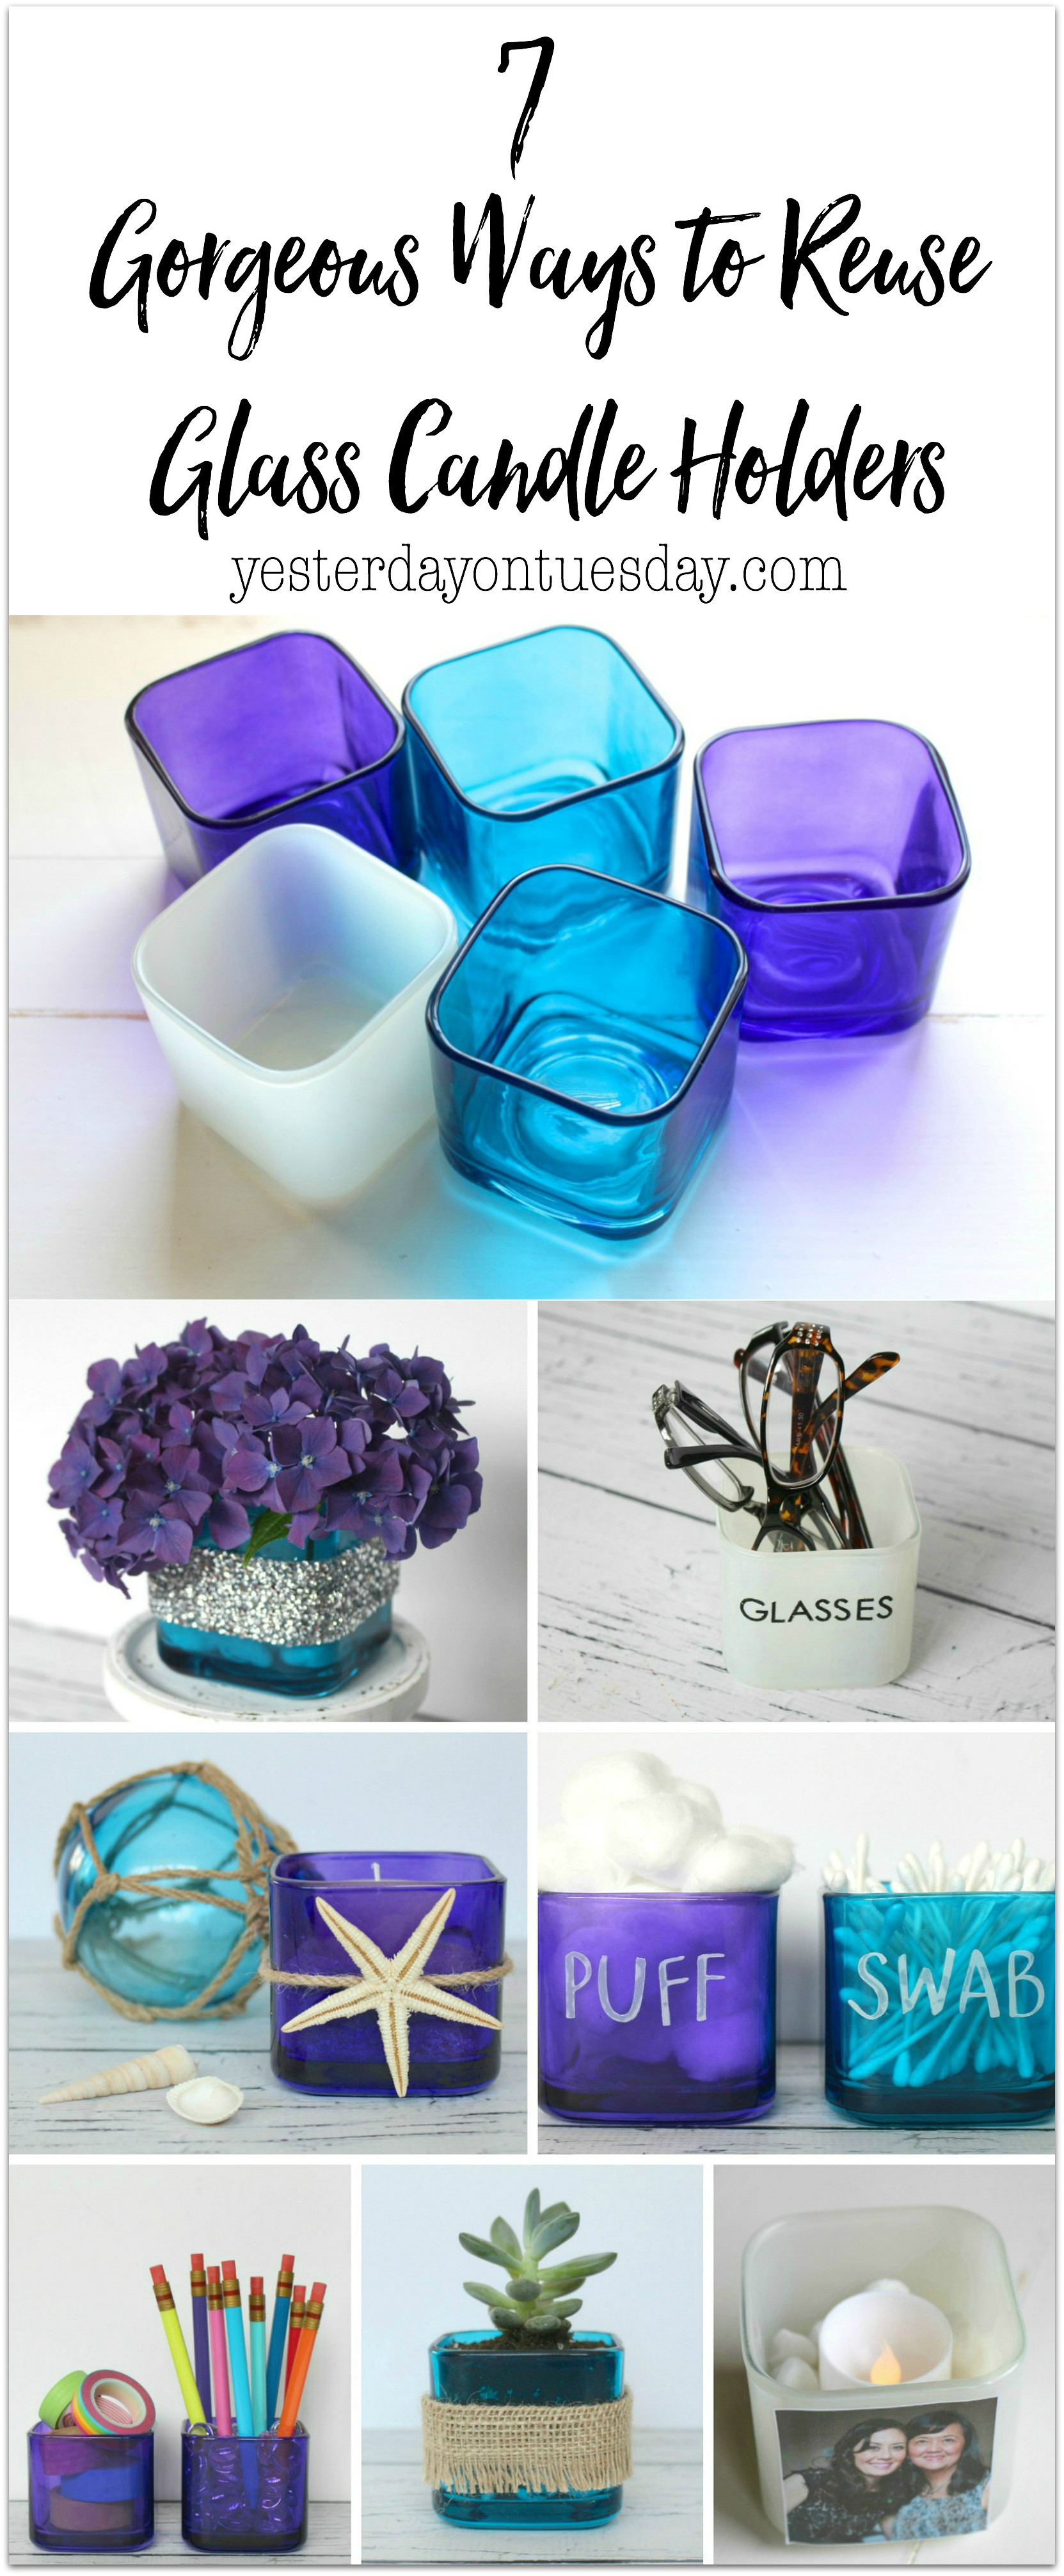 15 Unique Blue Glass Stones for Vases 2024 free download blue glass stones for vases of 7 gorgeous ways to reuse glass candle holders intended for 7 gorgeous ways to reuse glass candle holders